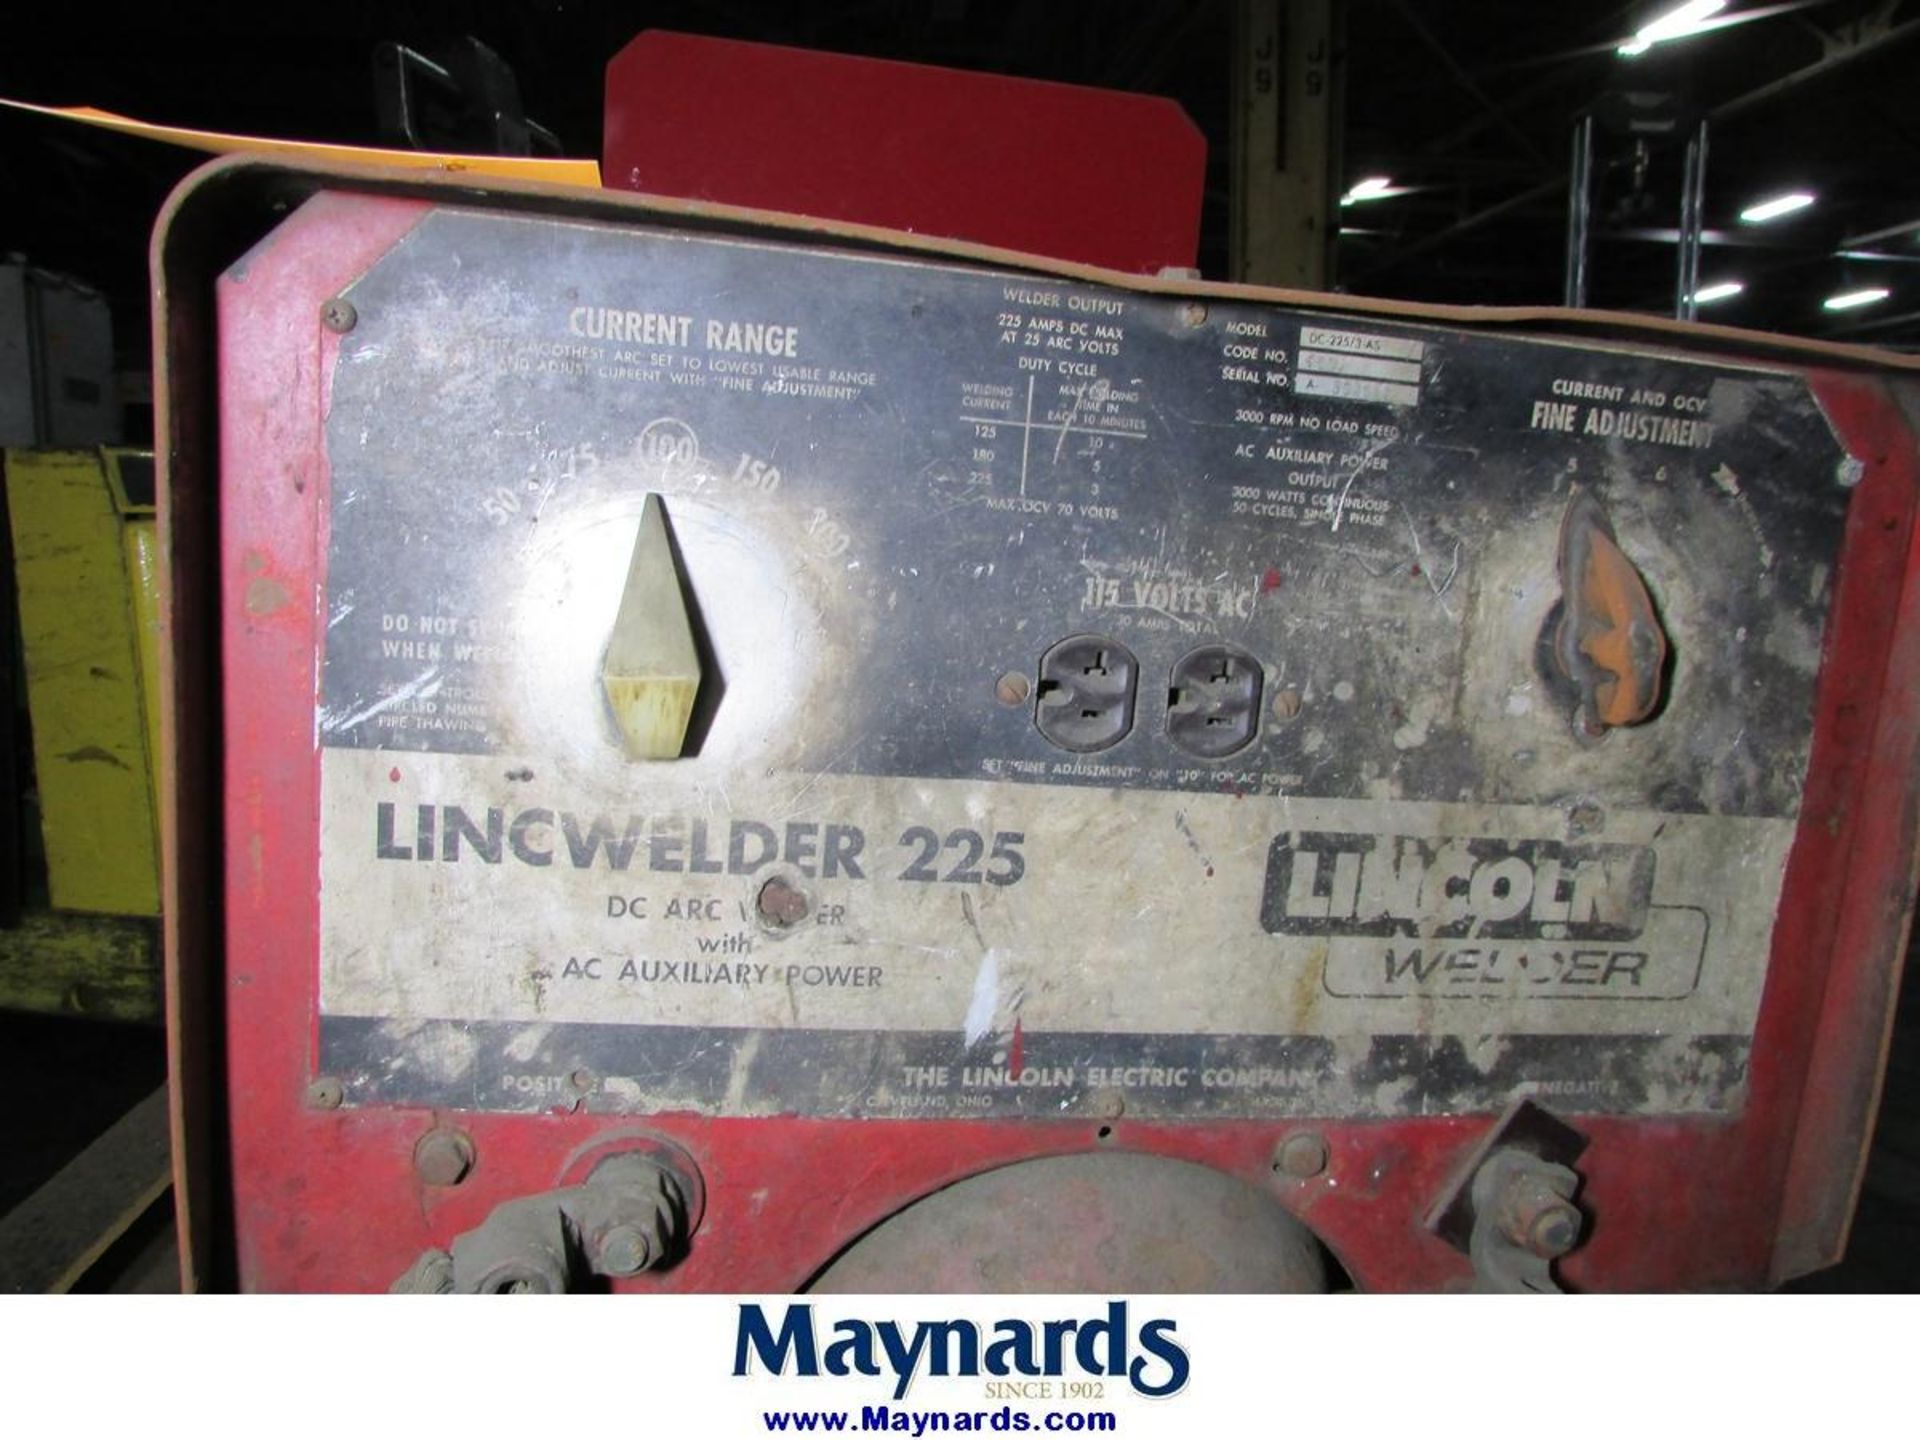 Lincoln Lincwelder DC-225/3-AS DC Arc Welder with AC Auxiliary Power - Image 2 of 7